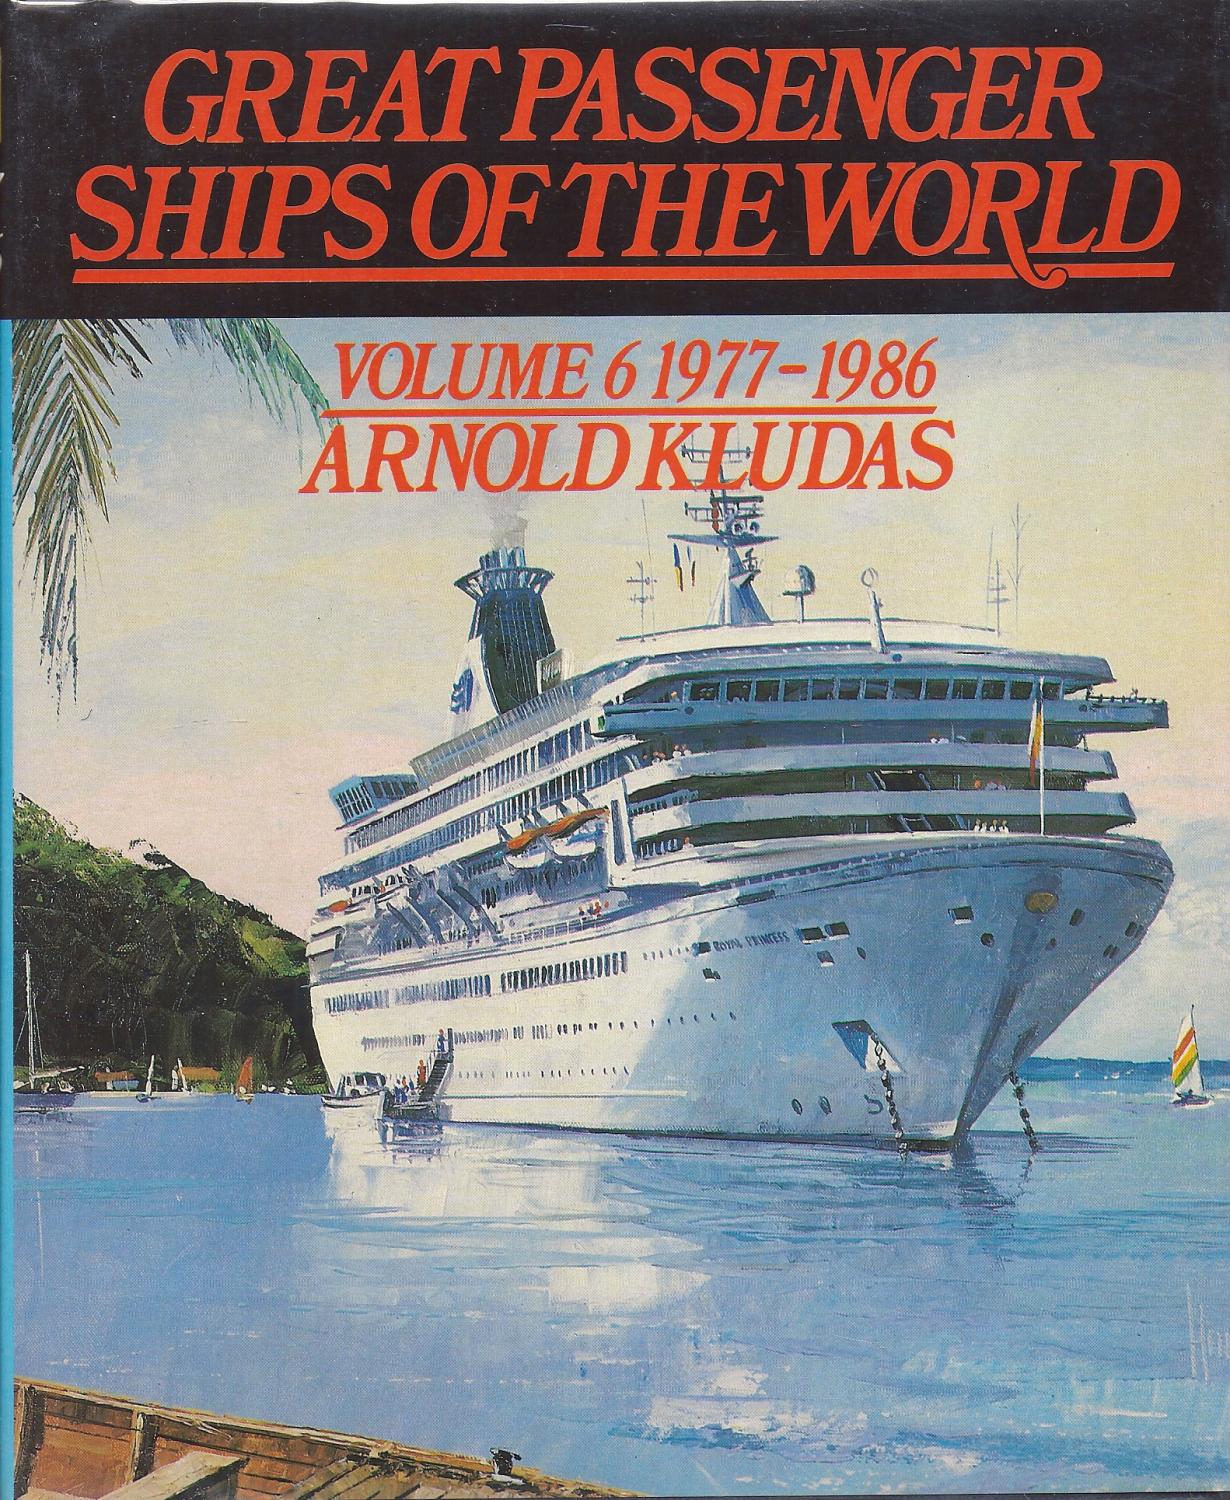 Great Passenger Ships of the World Volume 6 1977 - 1986. Translated from the German by Keith Lewis kk AS NEW - Kludas, Arnold